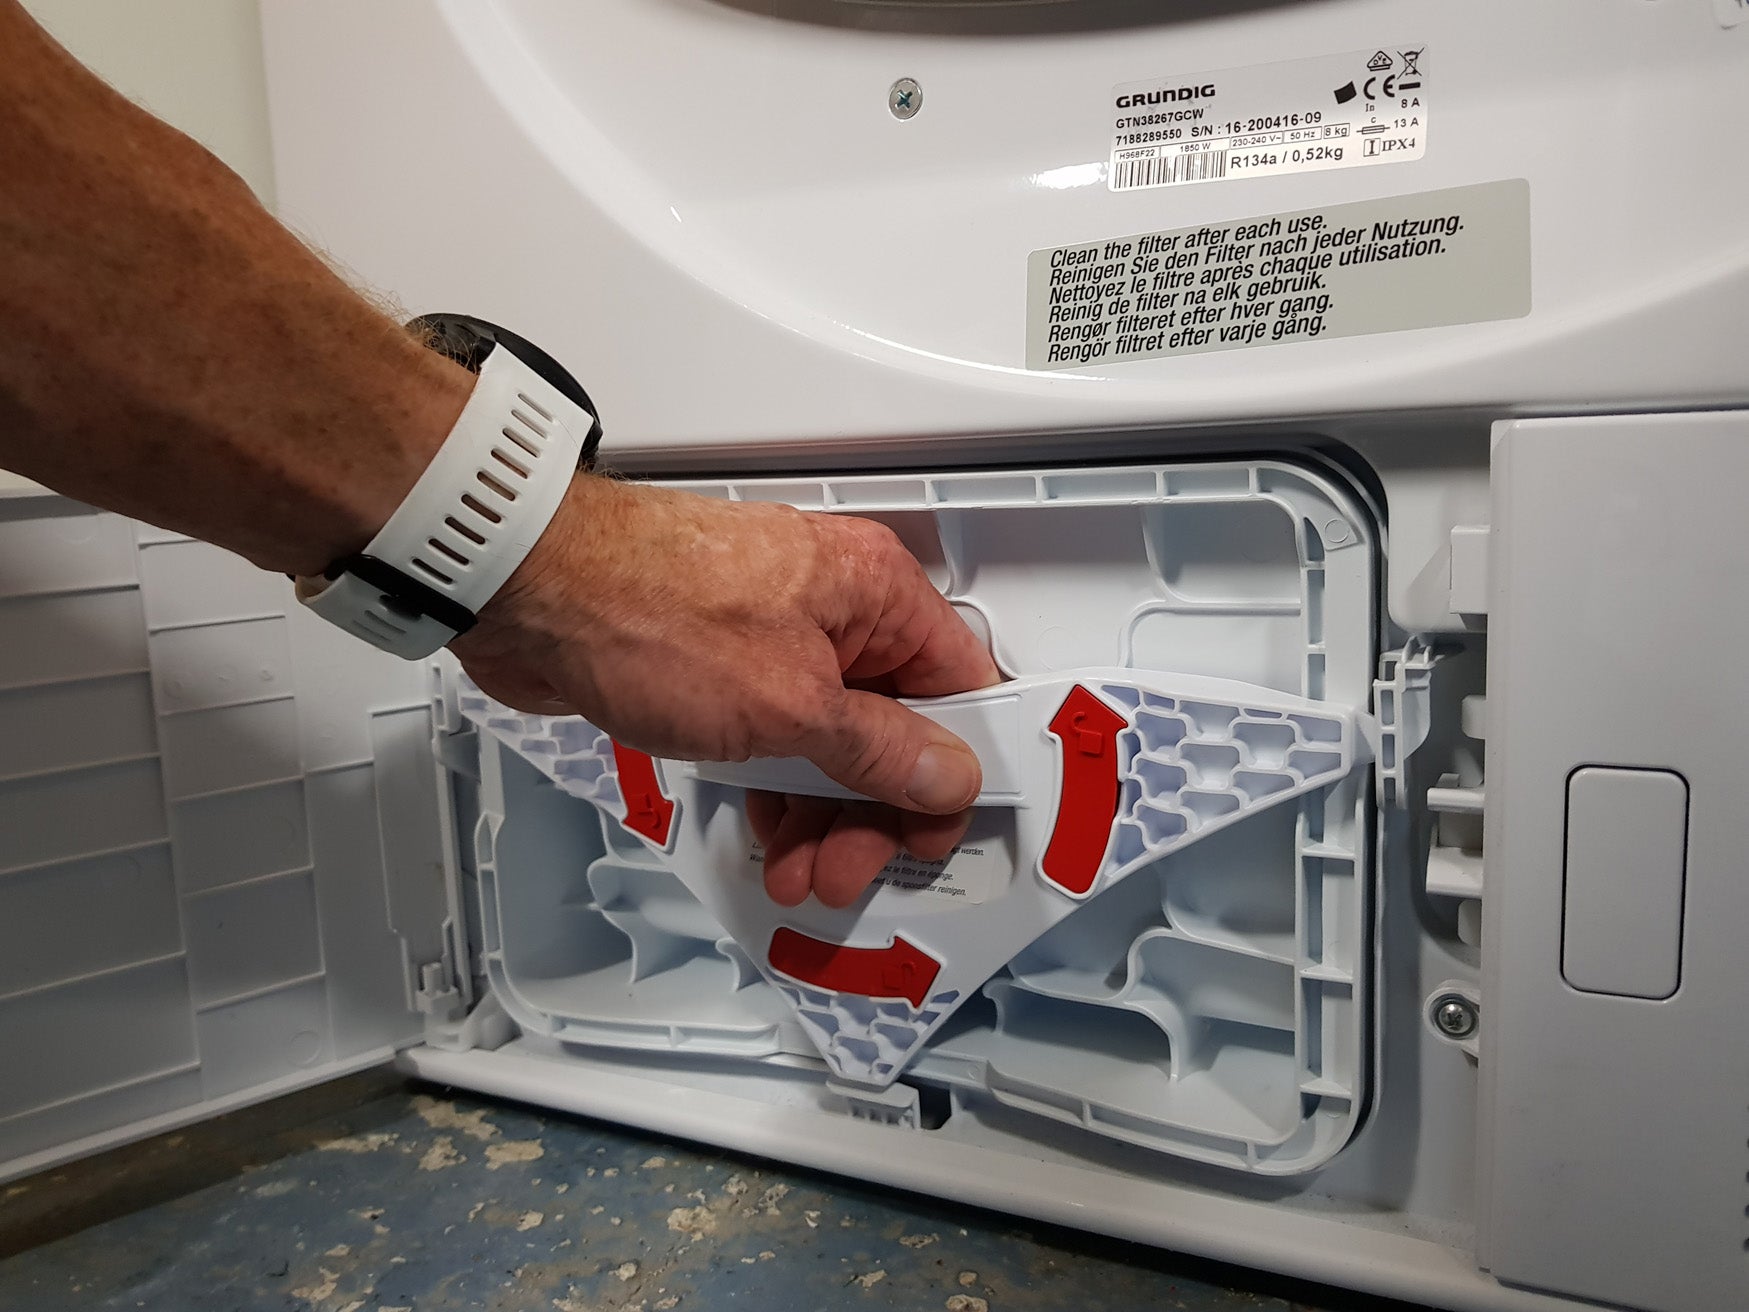 Person removing lint filter from Grundig dryer